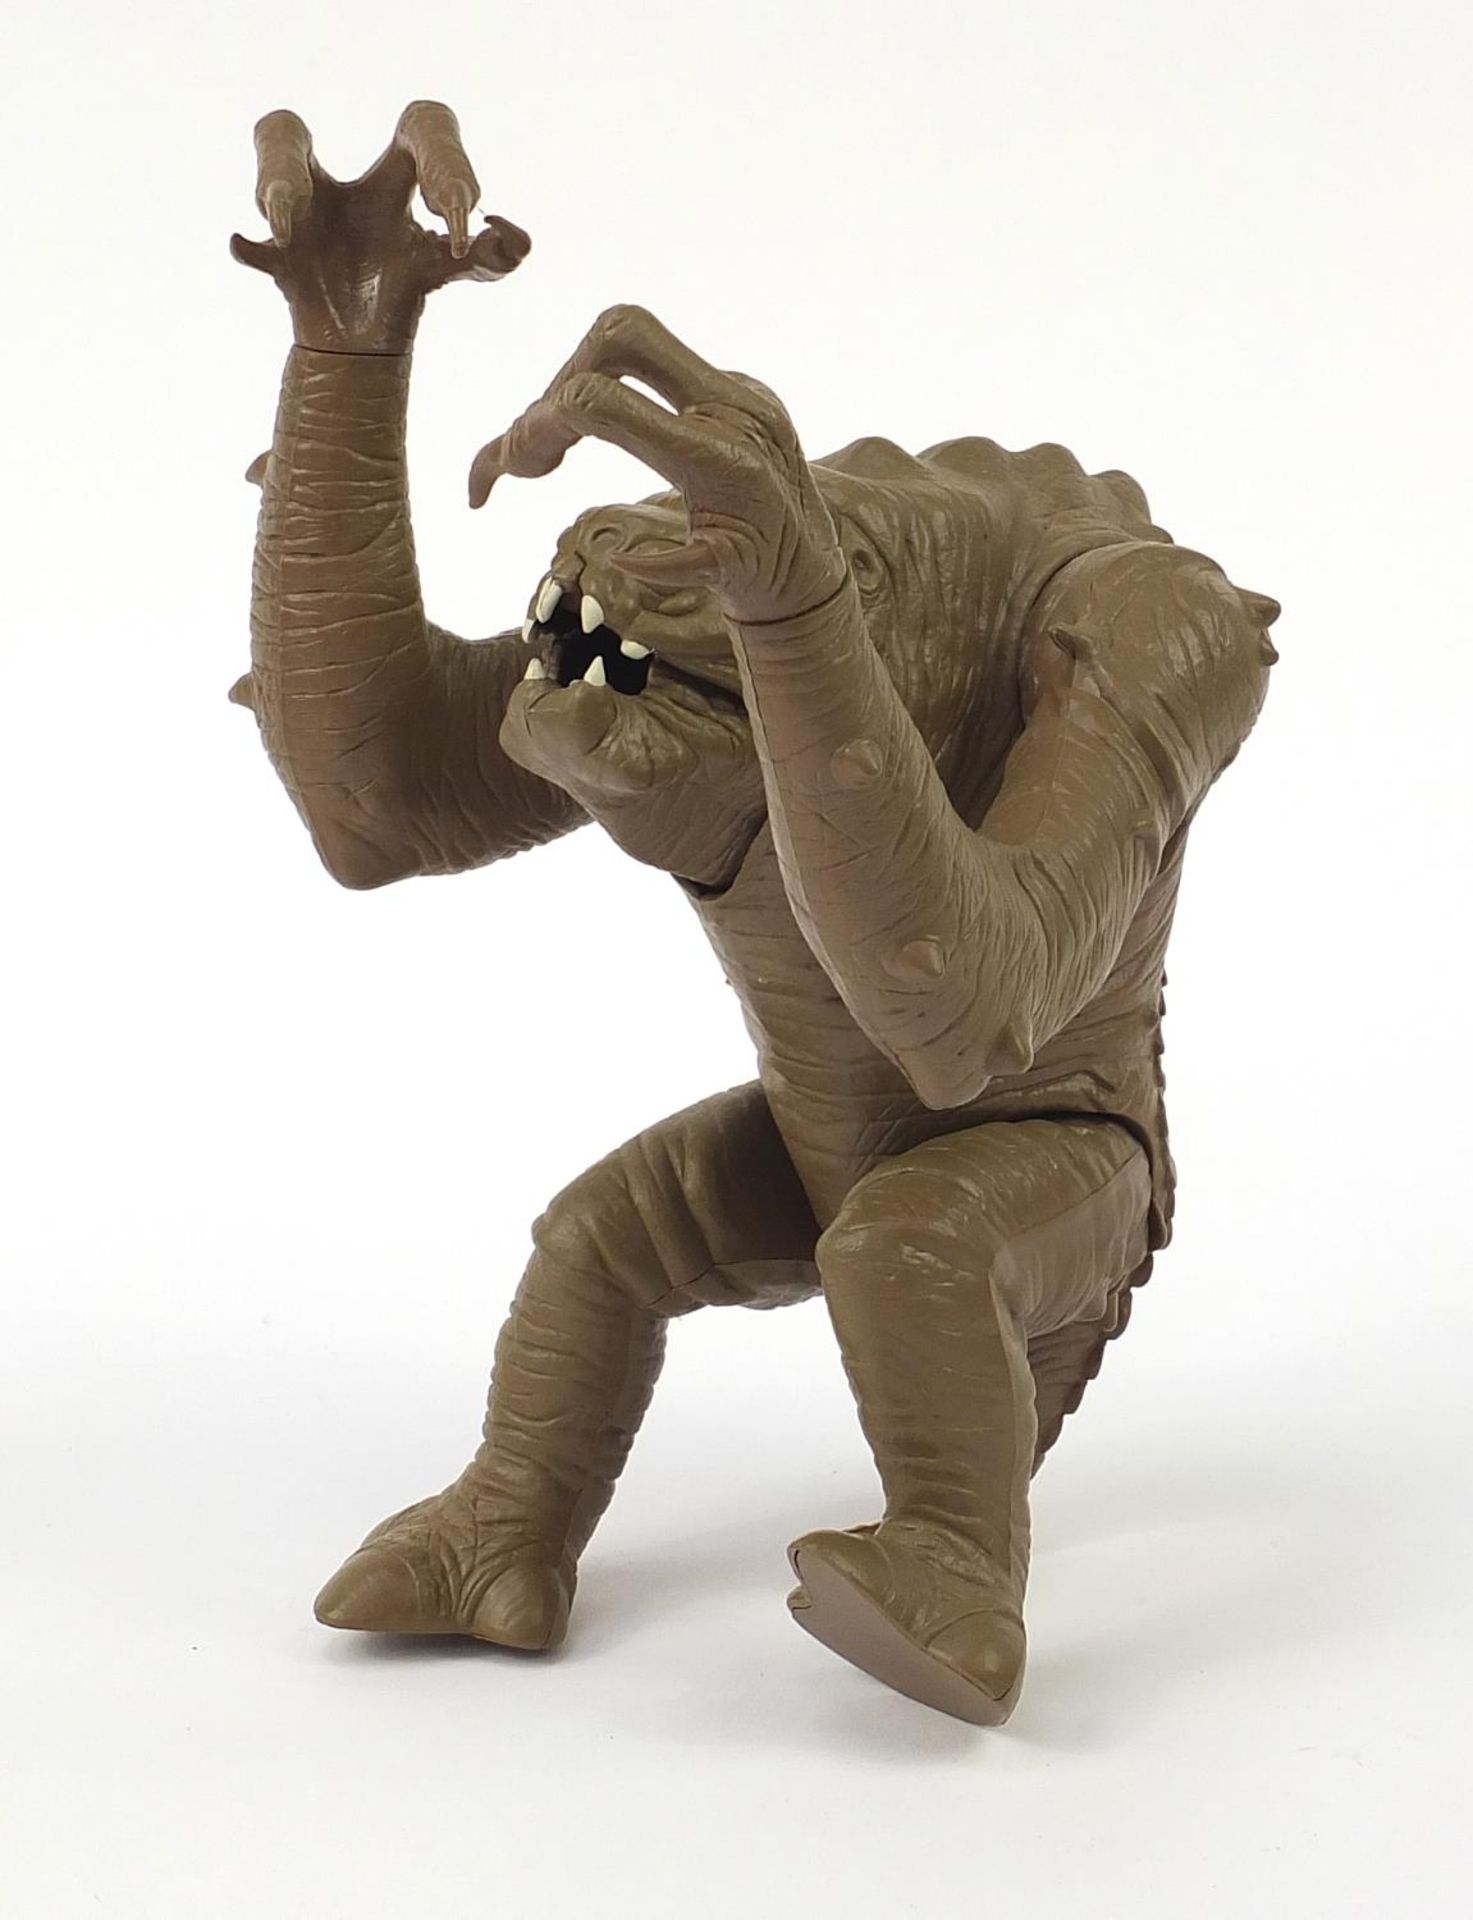 Vintage Star Wars Return of the Jedi Rancor Monster figure with box :For Further Condition Reports - Image 2 of 4